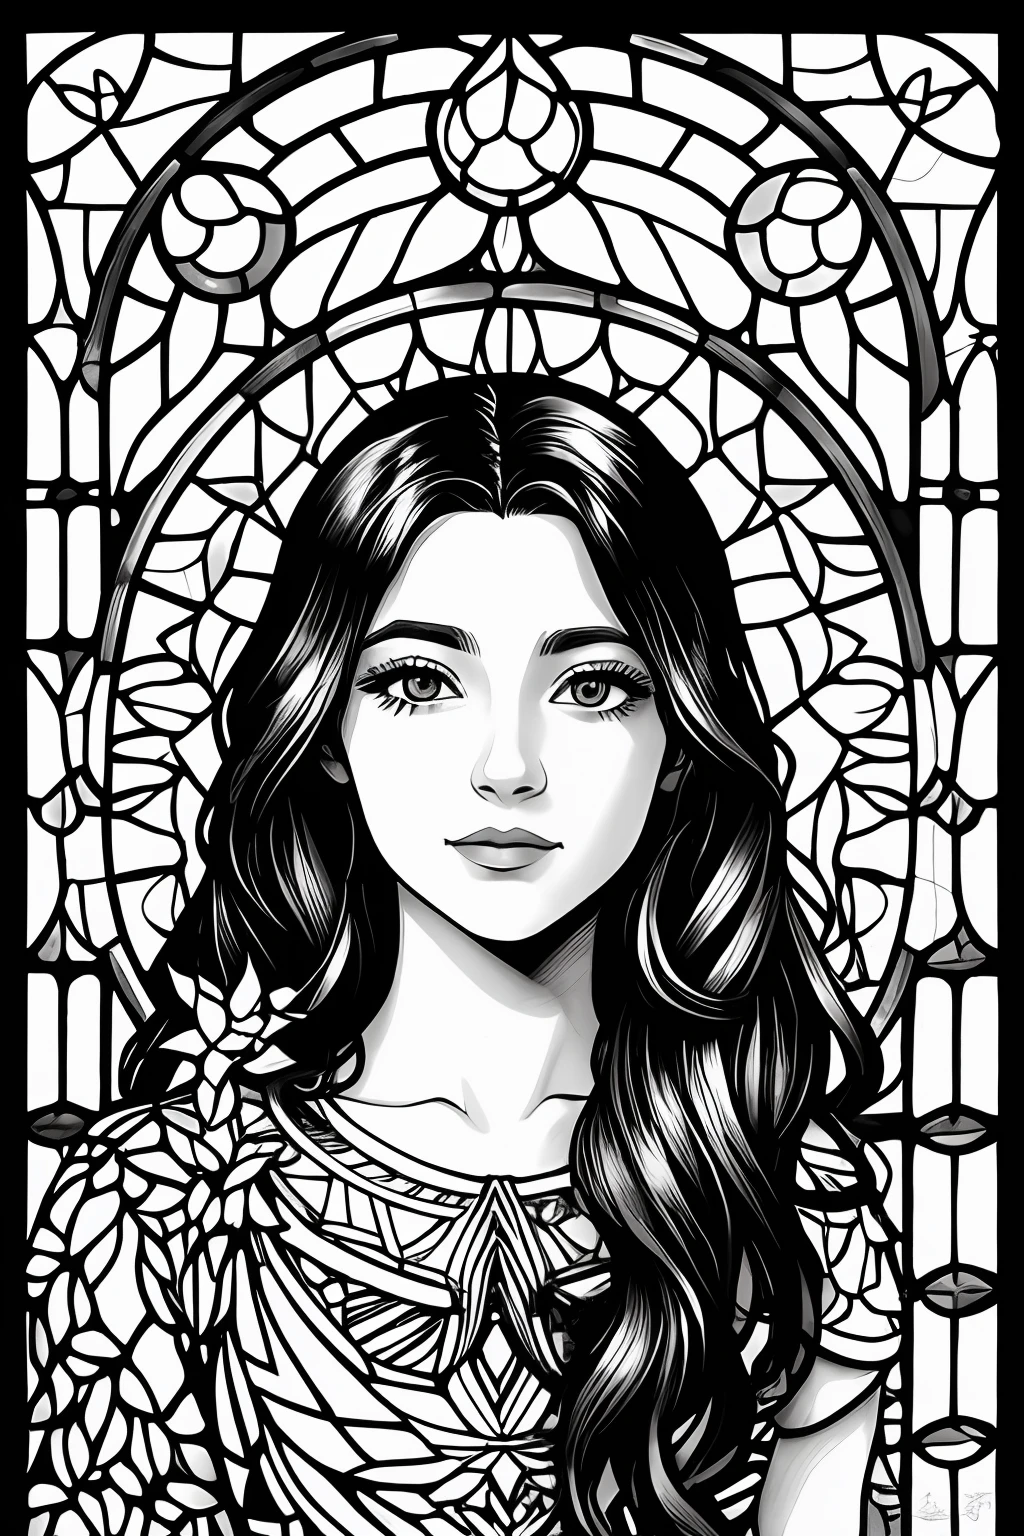 tidal game, Luxray, split colored hair, wind, Flying petals, stainedglassai, ornamental, intricate details, dufkova, 2d, Line art, watercolor, watercolor de tinta, random color hair, super long hair, Wavy, 1girl, mandrake, flower, mandrake, background line drawing, White background, monochrome, line drawing, black and white drawing to color,